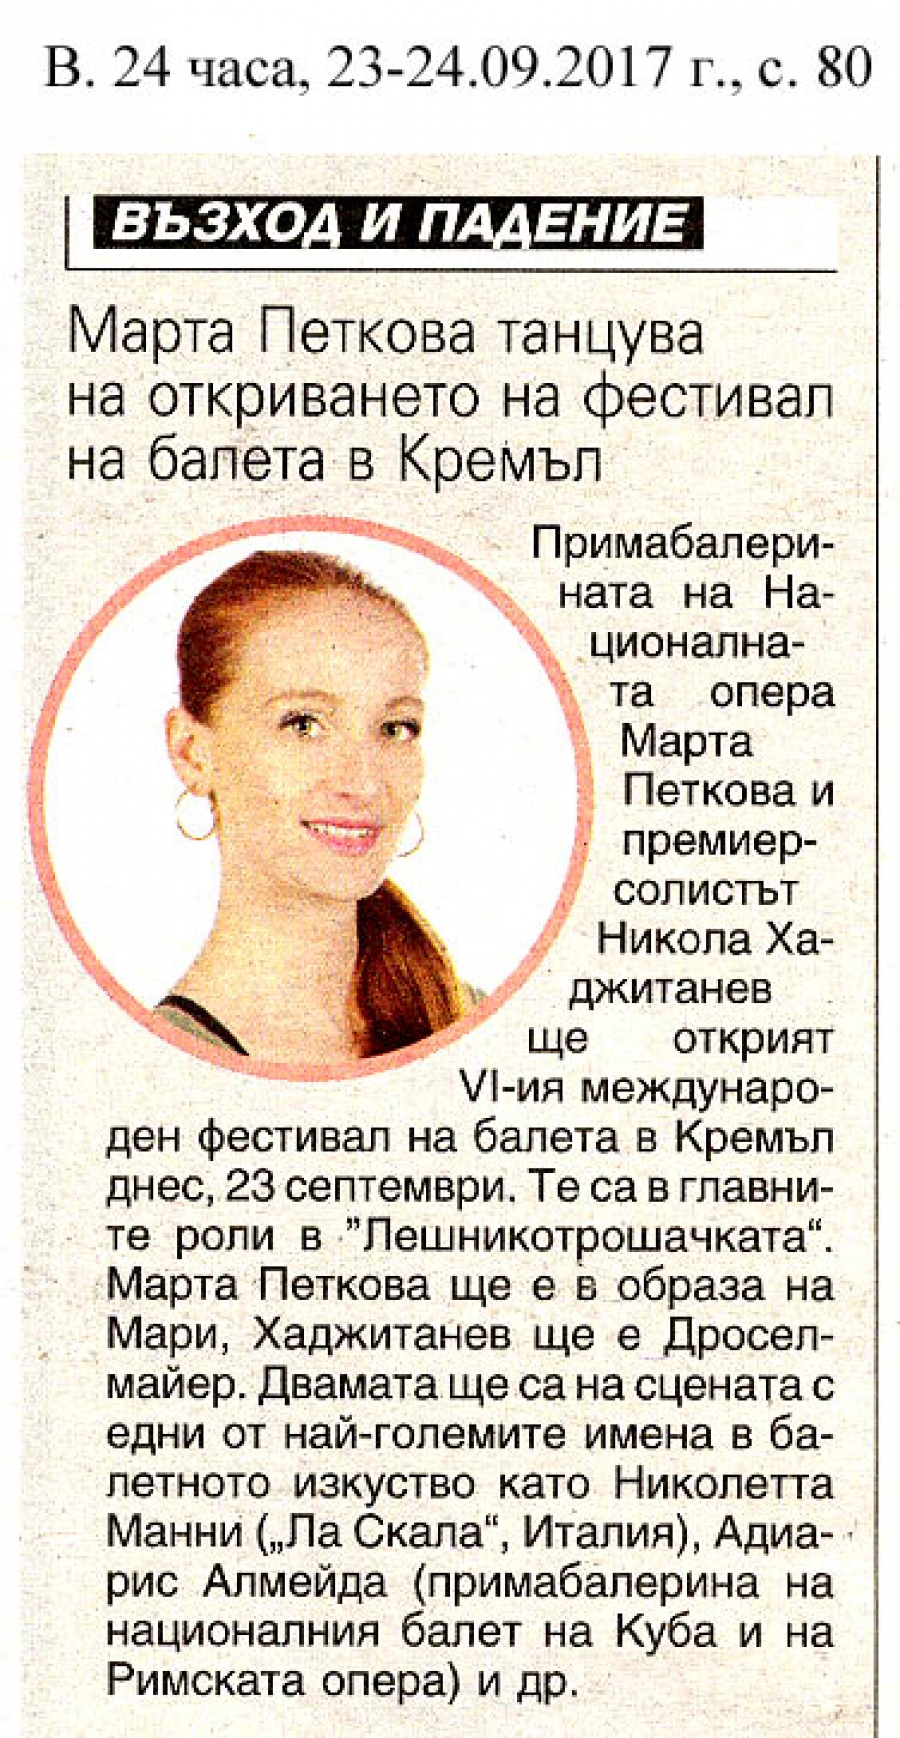 NEWSPAPER 24 CHASA – MARTA PETKOVA WILL DANCE AT THE OPENING OF A FESTIVAL OF THE BALLET IN KREMLIN